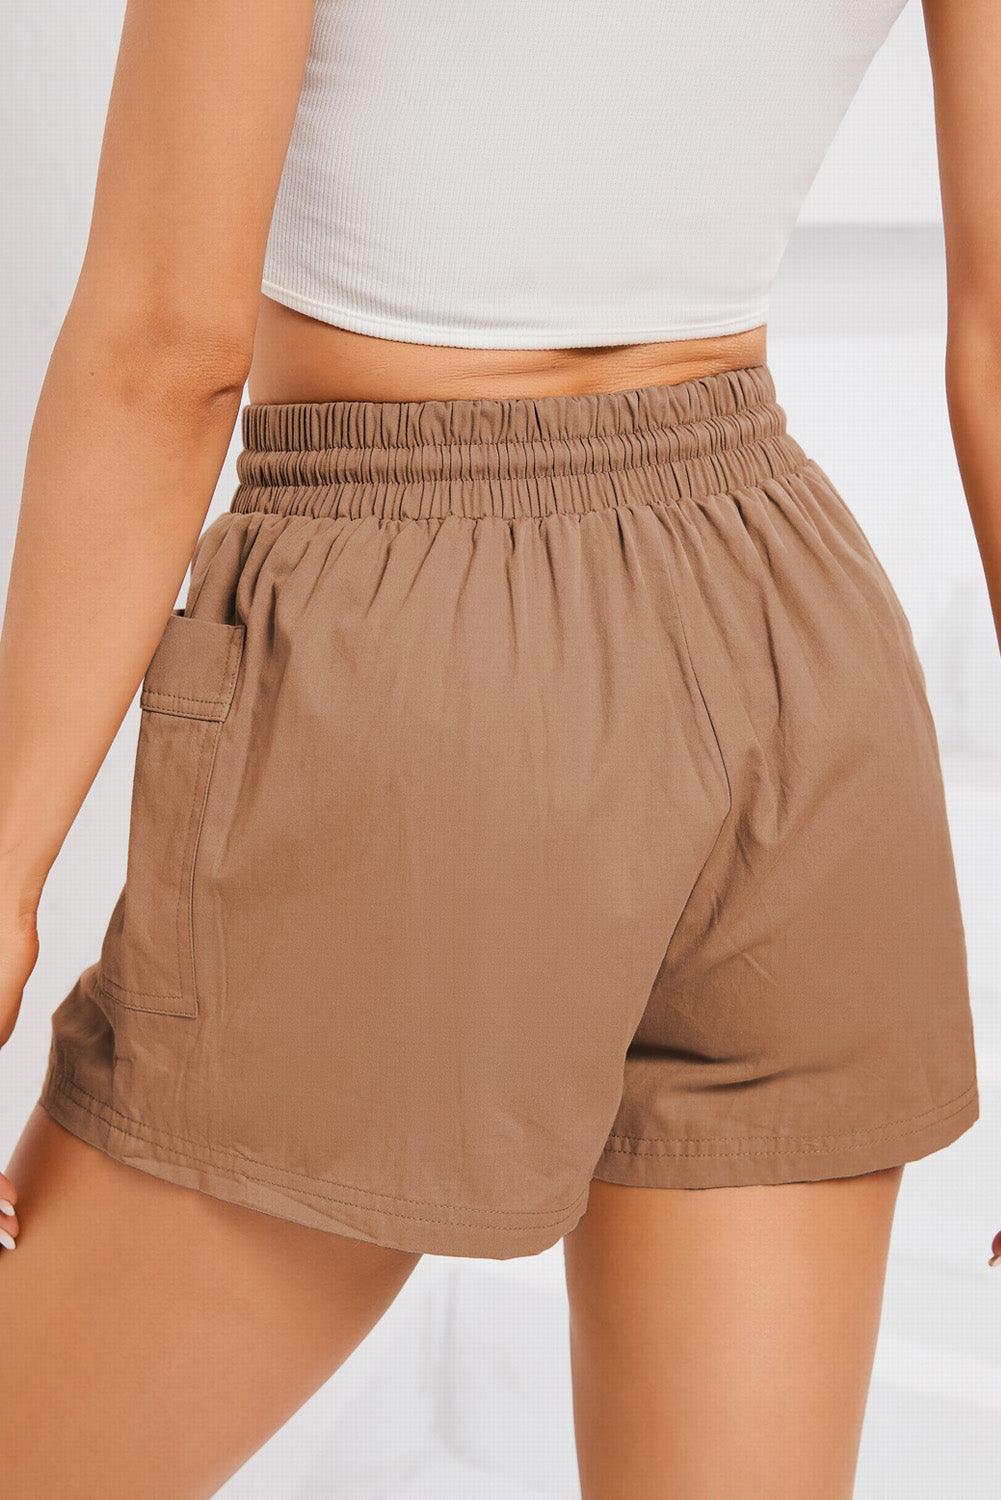 Wander In Style Women's Casual Shorts With Pockets - MXSTUDIO.COM